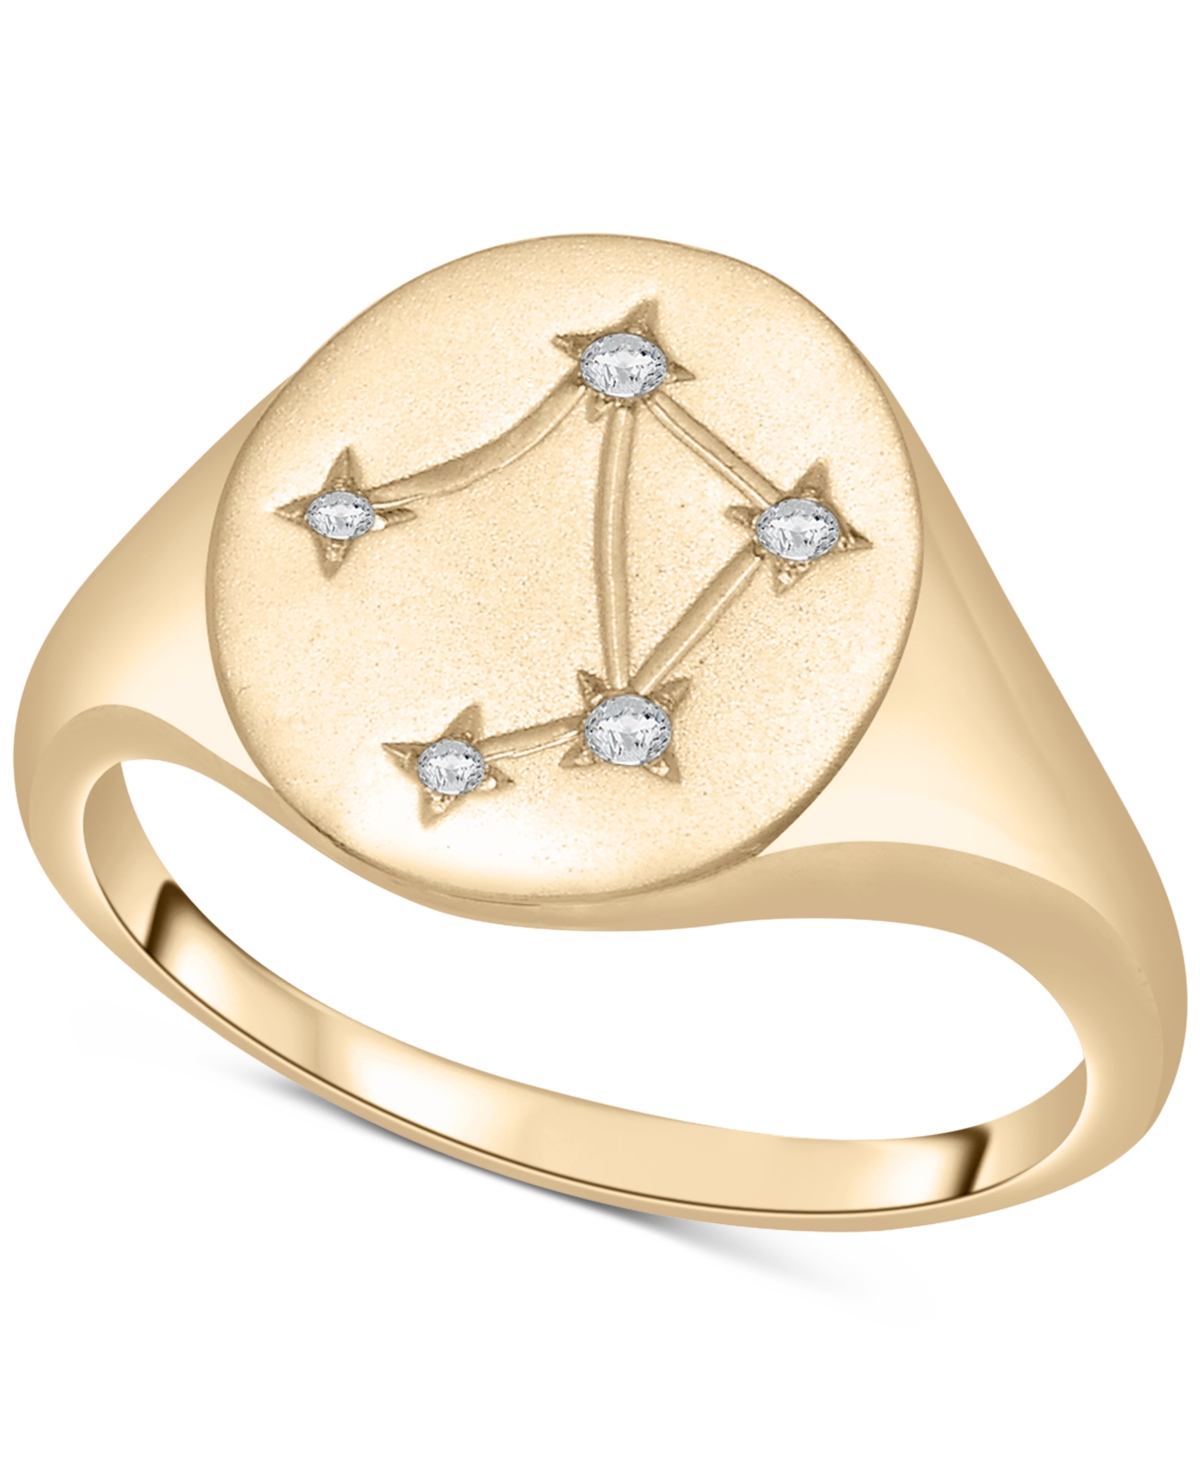 Diamond Libra Constellation Ring (1/20 ct. t.w.) in 10k Gold, Created for Macy's - Yellow Gold